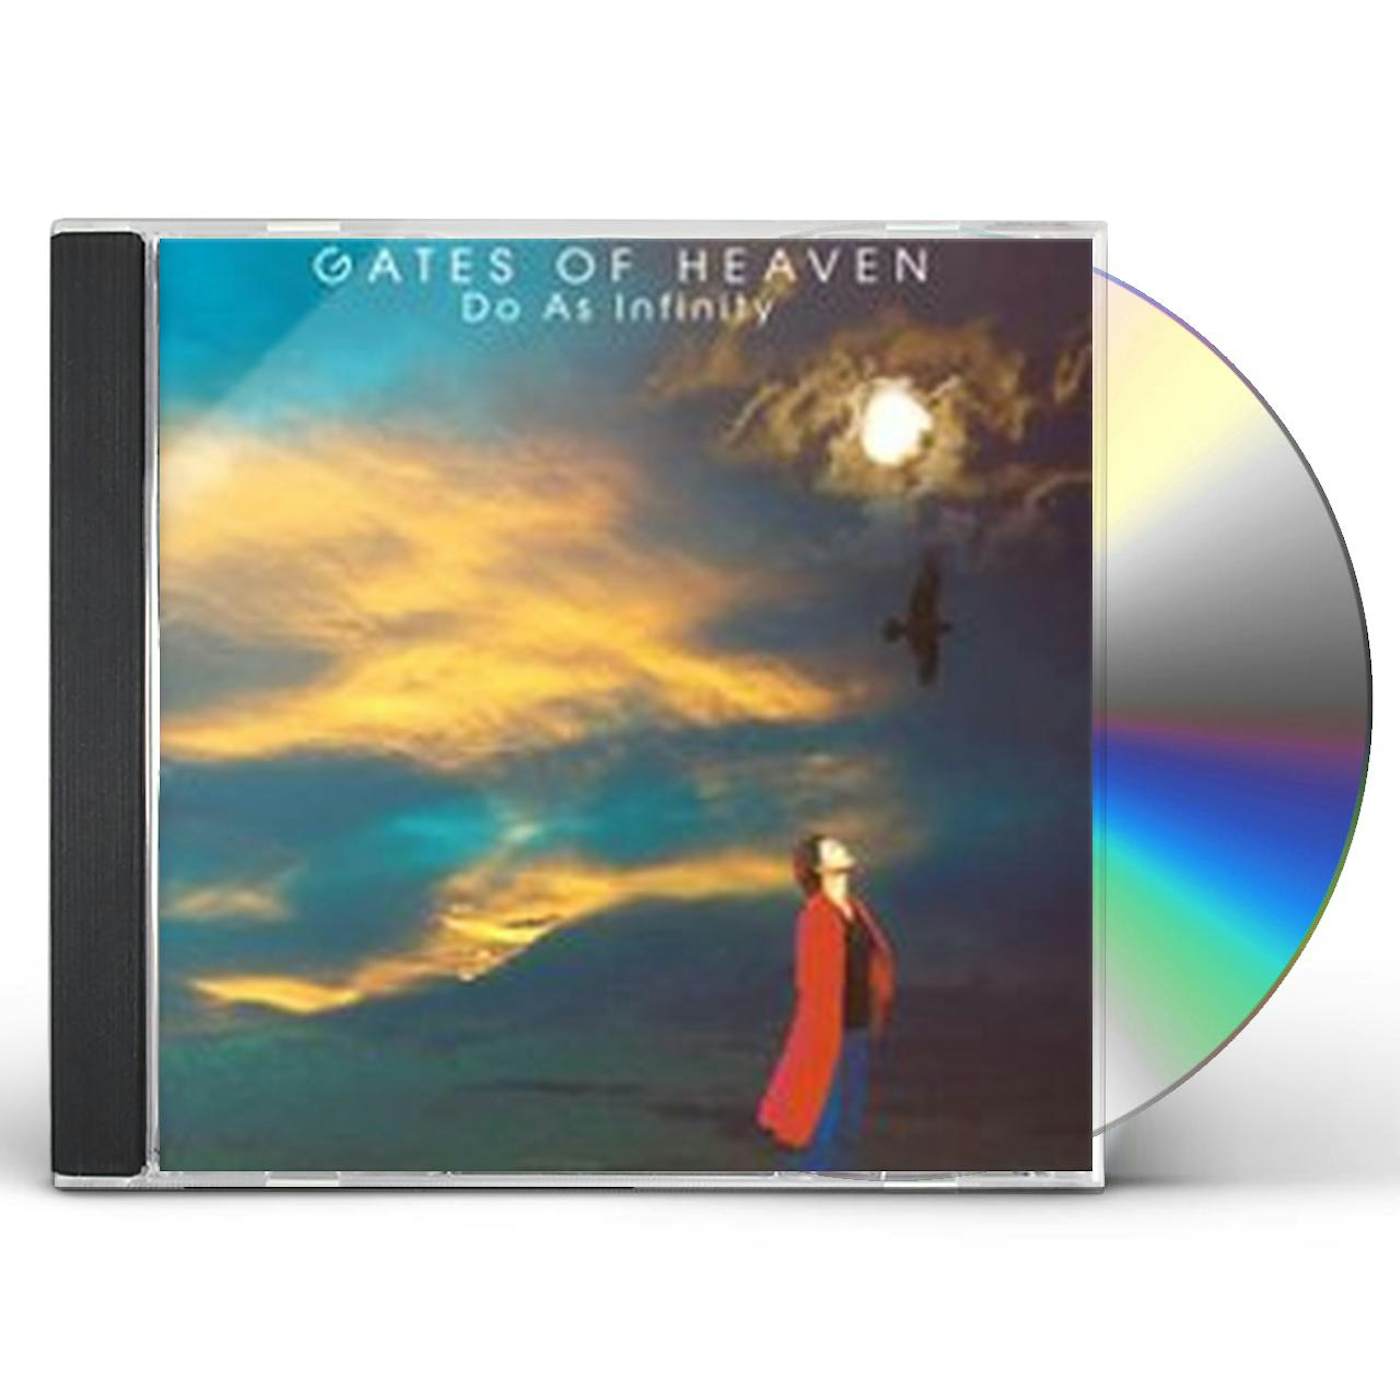 Do As Infinity GATES OF HEAVEN CD